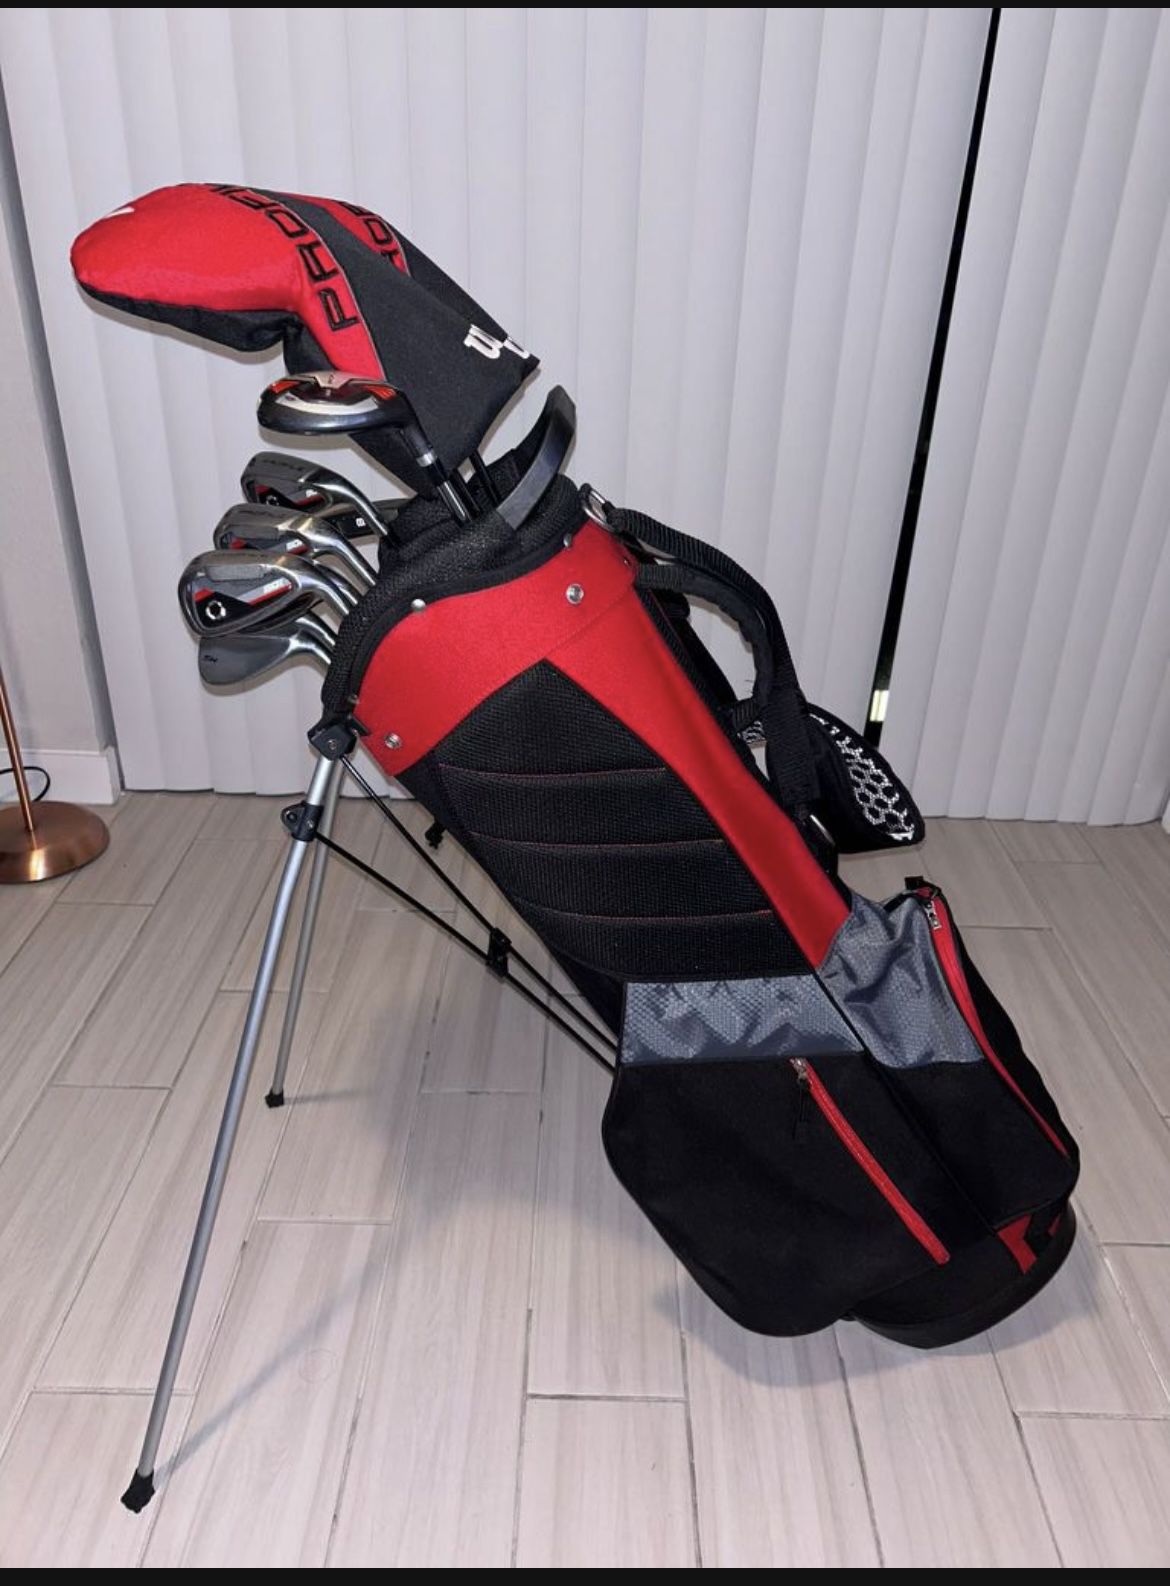 GOLF CLUBS FOR SALE! Mint Conditions. Bag Is Included $350 OBO